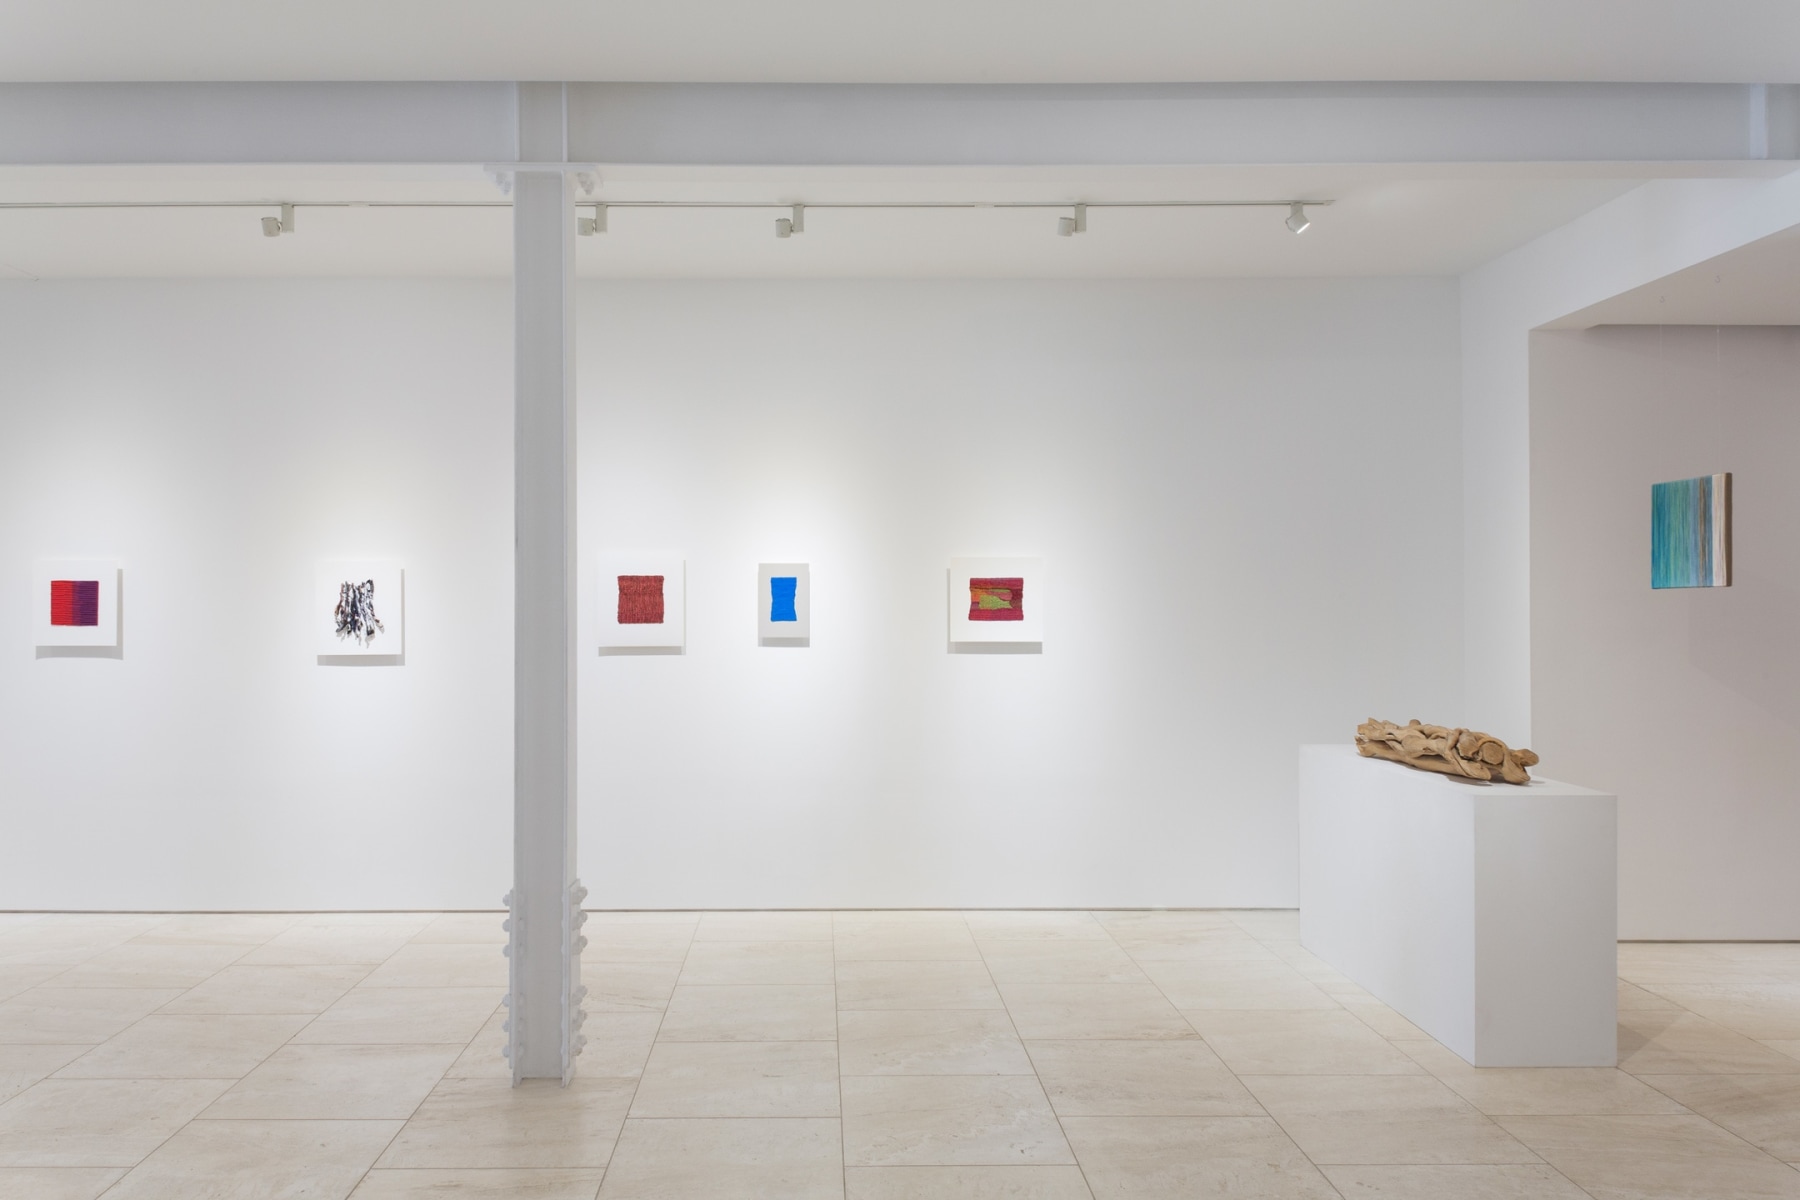 Installation view of&nbsp;Sheila Hicks: Line by Line, Step by Step, April 29 &ndash; August 17, 2019